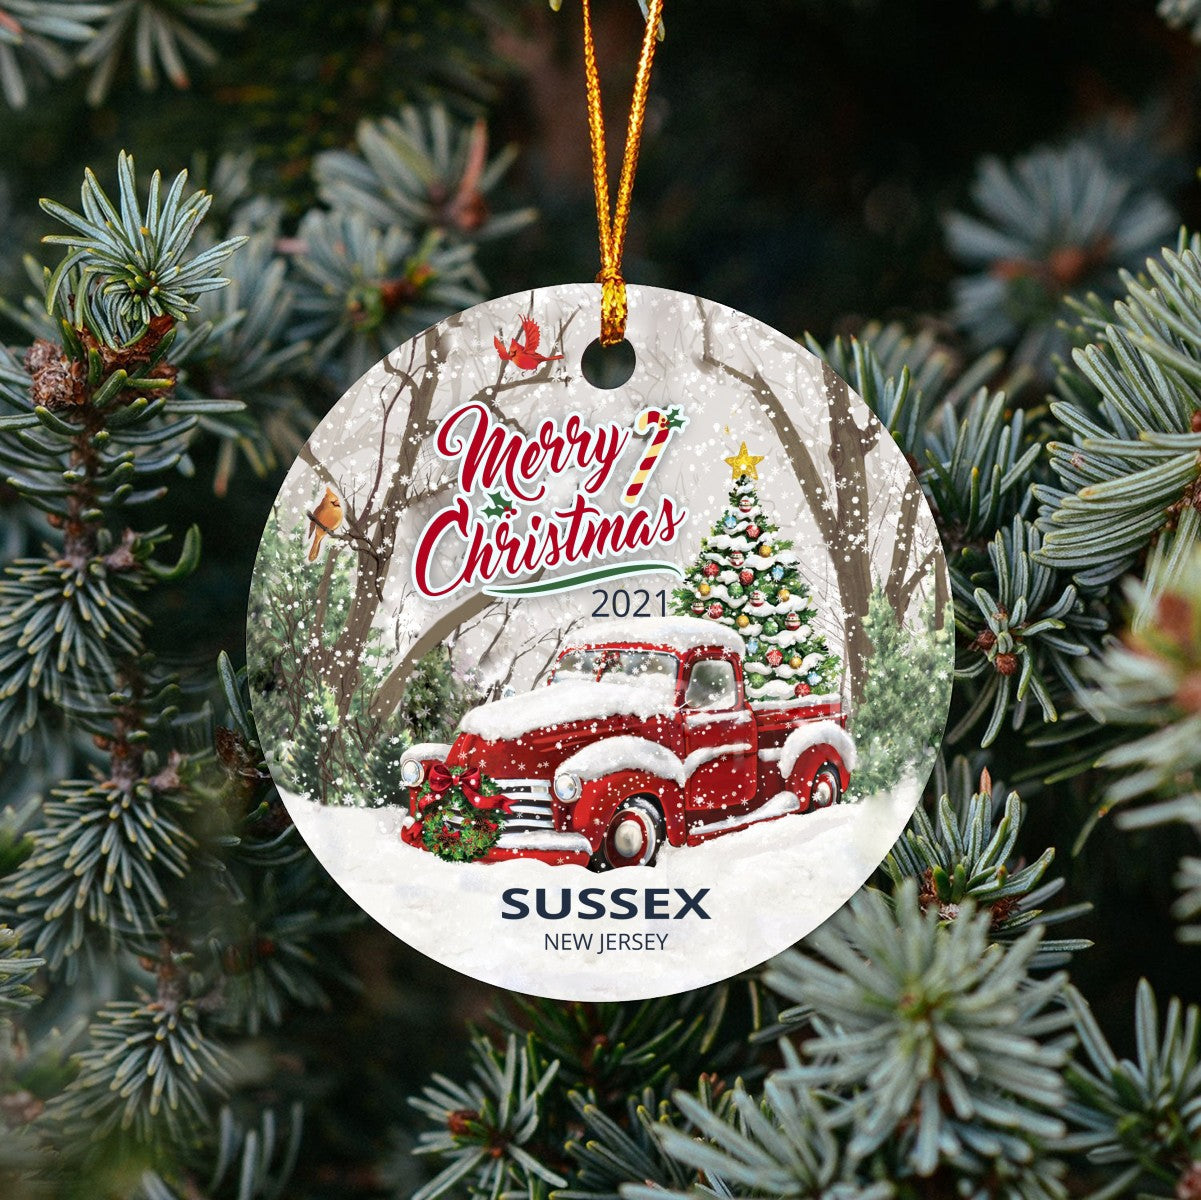 Christmas Tree Ornaments Sussex - Ornament With Name City, State Sussex New Jersey NJ Ornament - Red Truck Xmas Ornaments 3'' Plastic Gift For Family, Friend And Housewarming